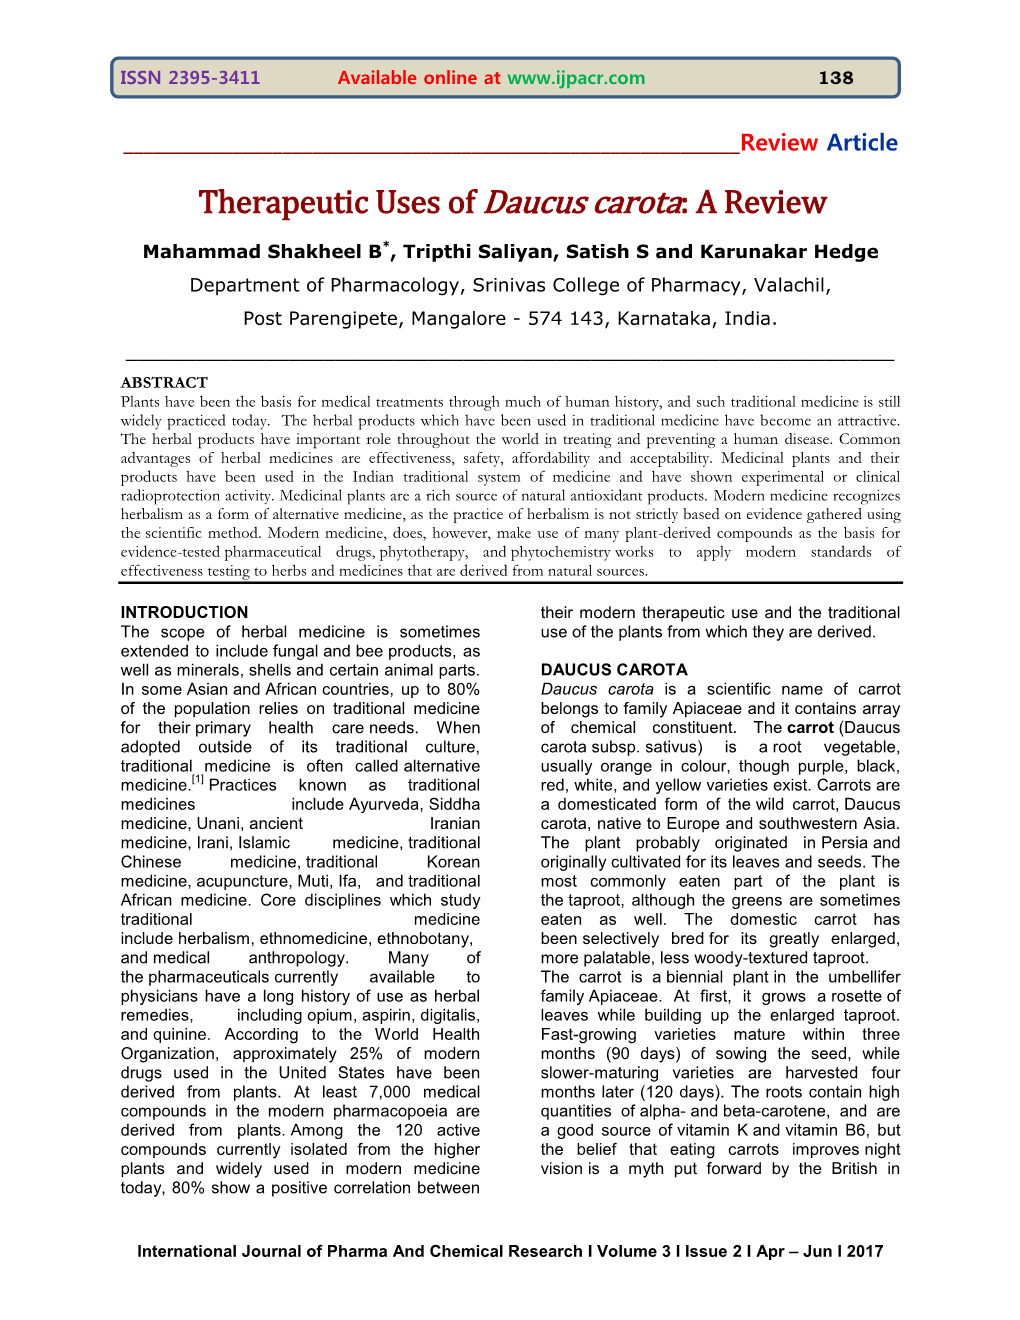 Therapeutic Uses of Daucus Carota: a Review